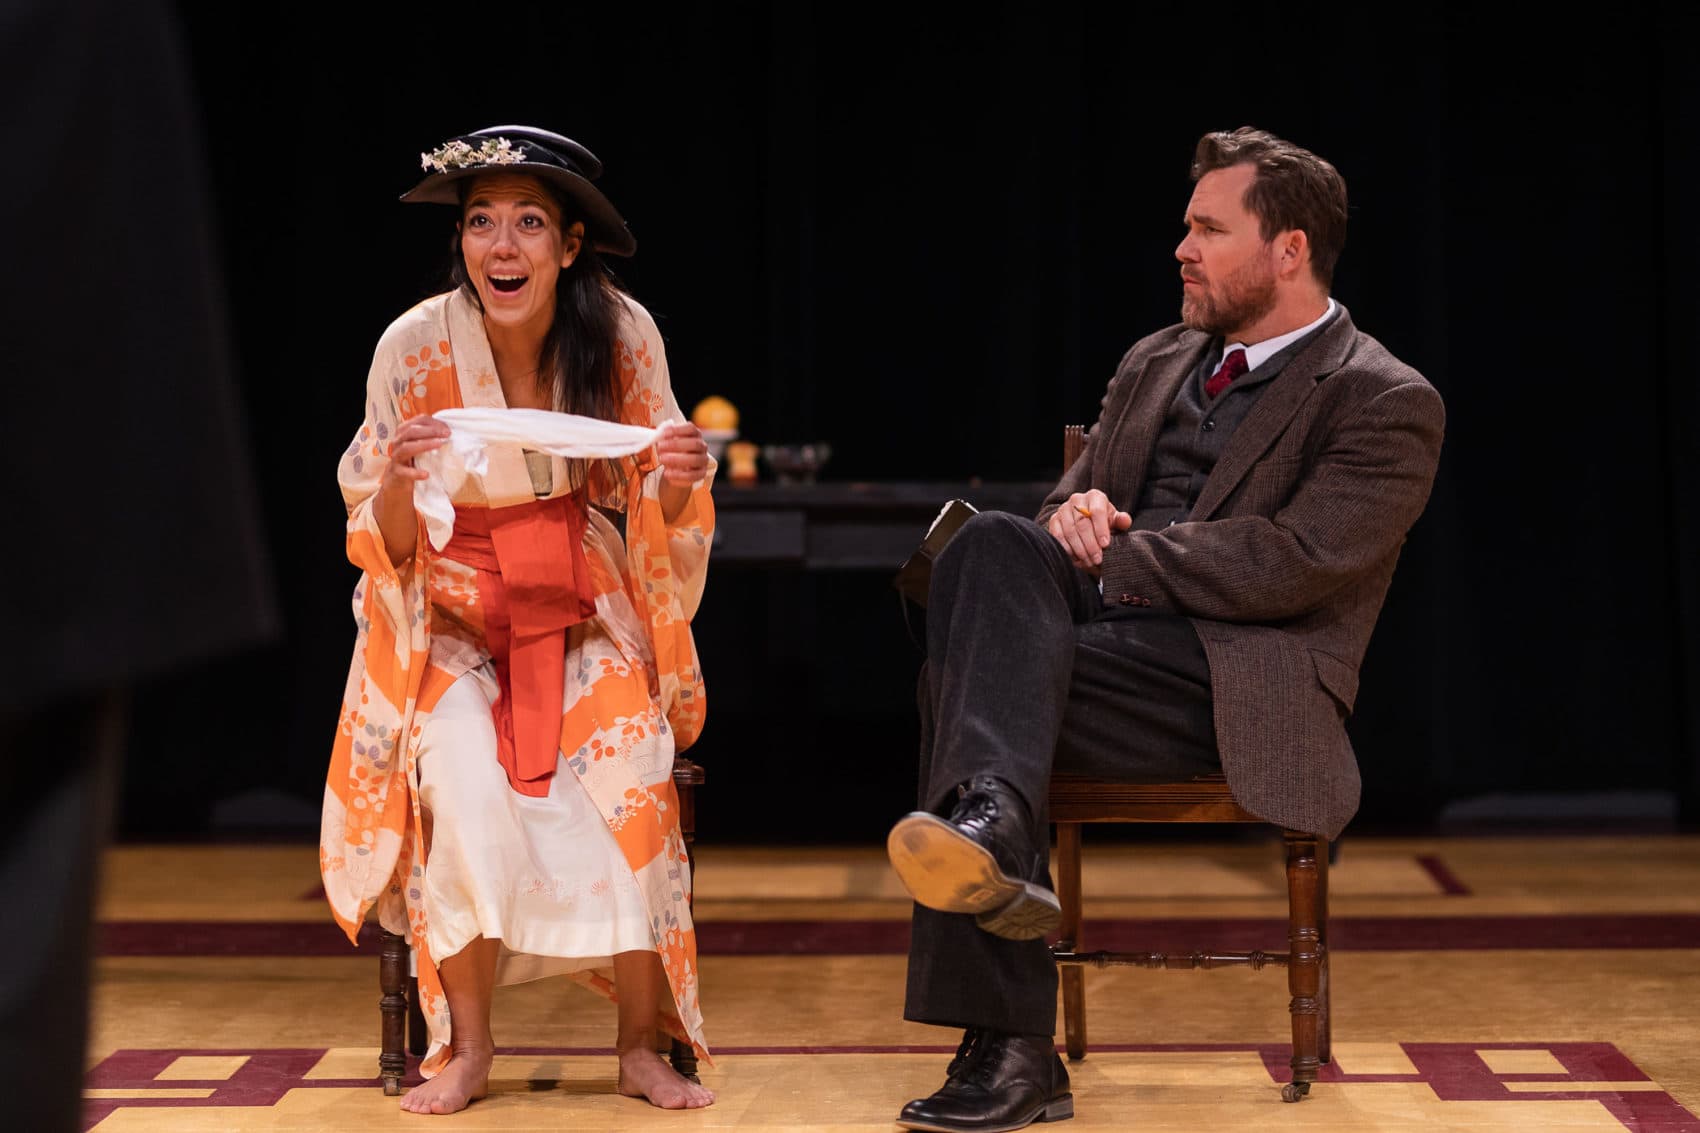 Vaishnavi Sharma as Eliza Doolittle and Eric Tucker as Henry Higgins in &quot;Bedlam's Pygmalion&quot; at Central Square Theater. (Courtesy Nile Scott Studios)